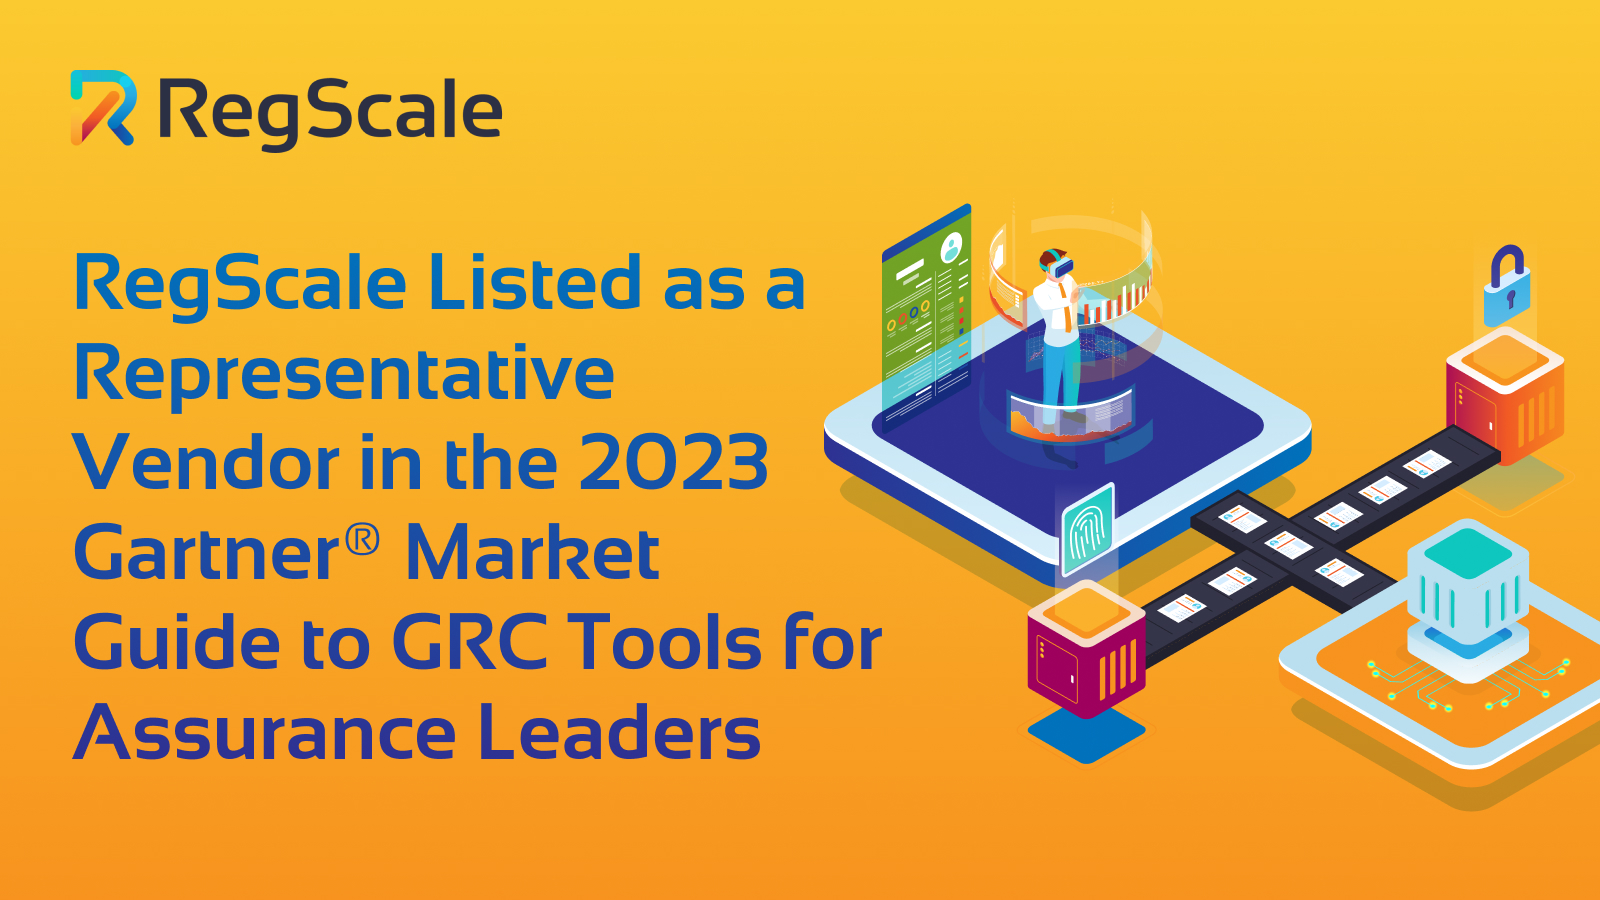 Regscale Listed as a Representative Vendor in the 2023 Gartner Market Guide to GRC Tools for Assurance Leaders